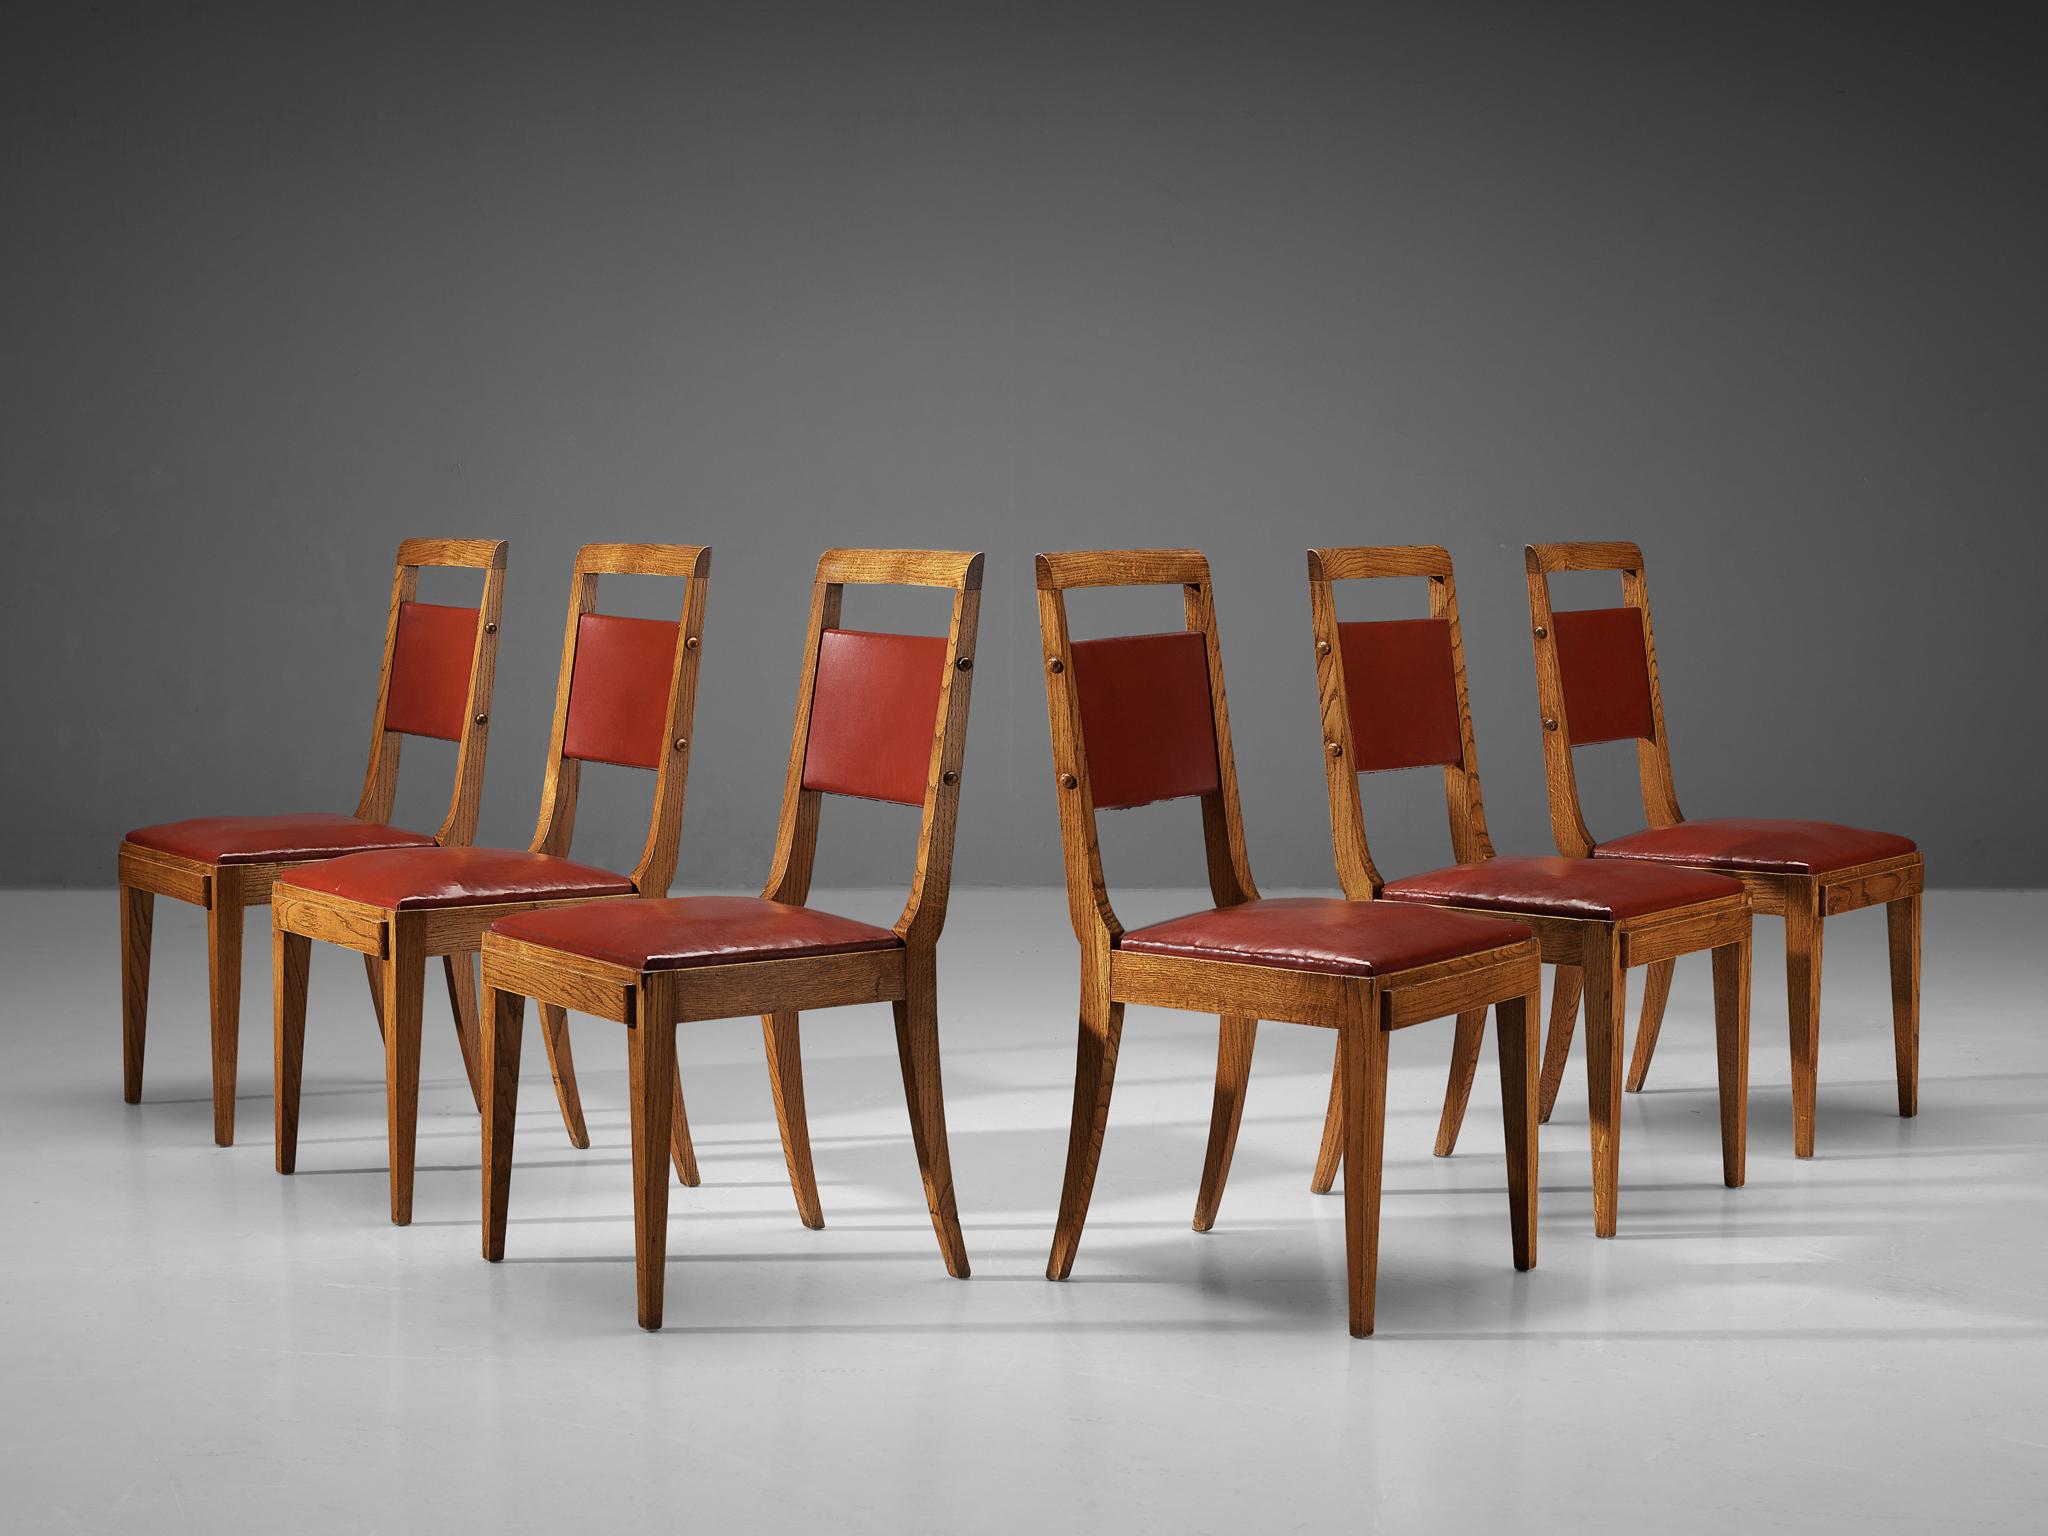 Set of six dining chairs, oak, leatherette, France, 1930s/1940s

These French dining chairs employ the stylistic traits of the French Art Deco in the period of the 1930s and 1940s. In addition, the design reminds of the works by French master